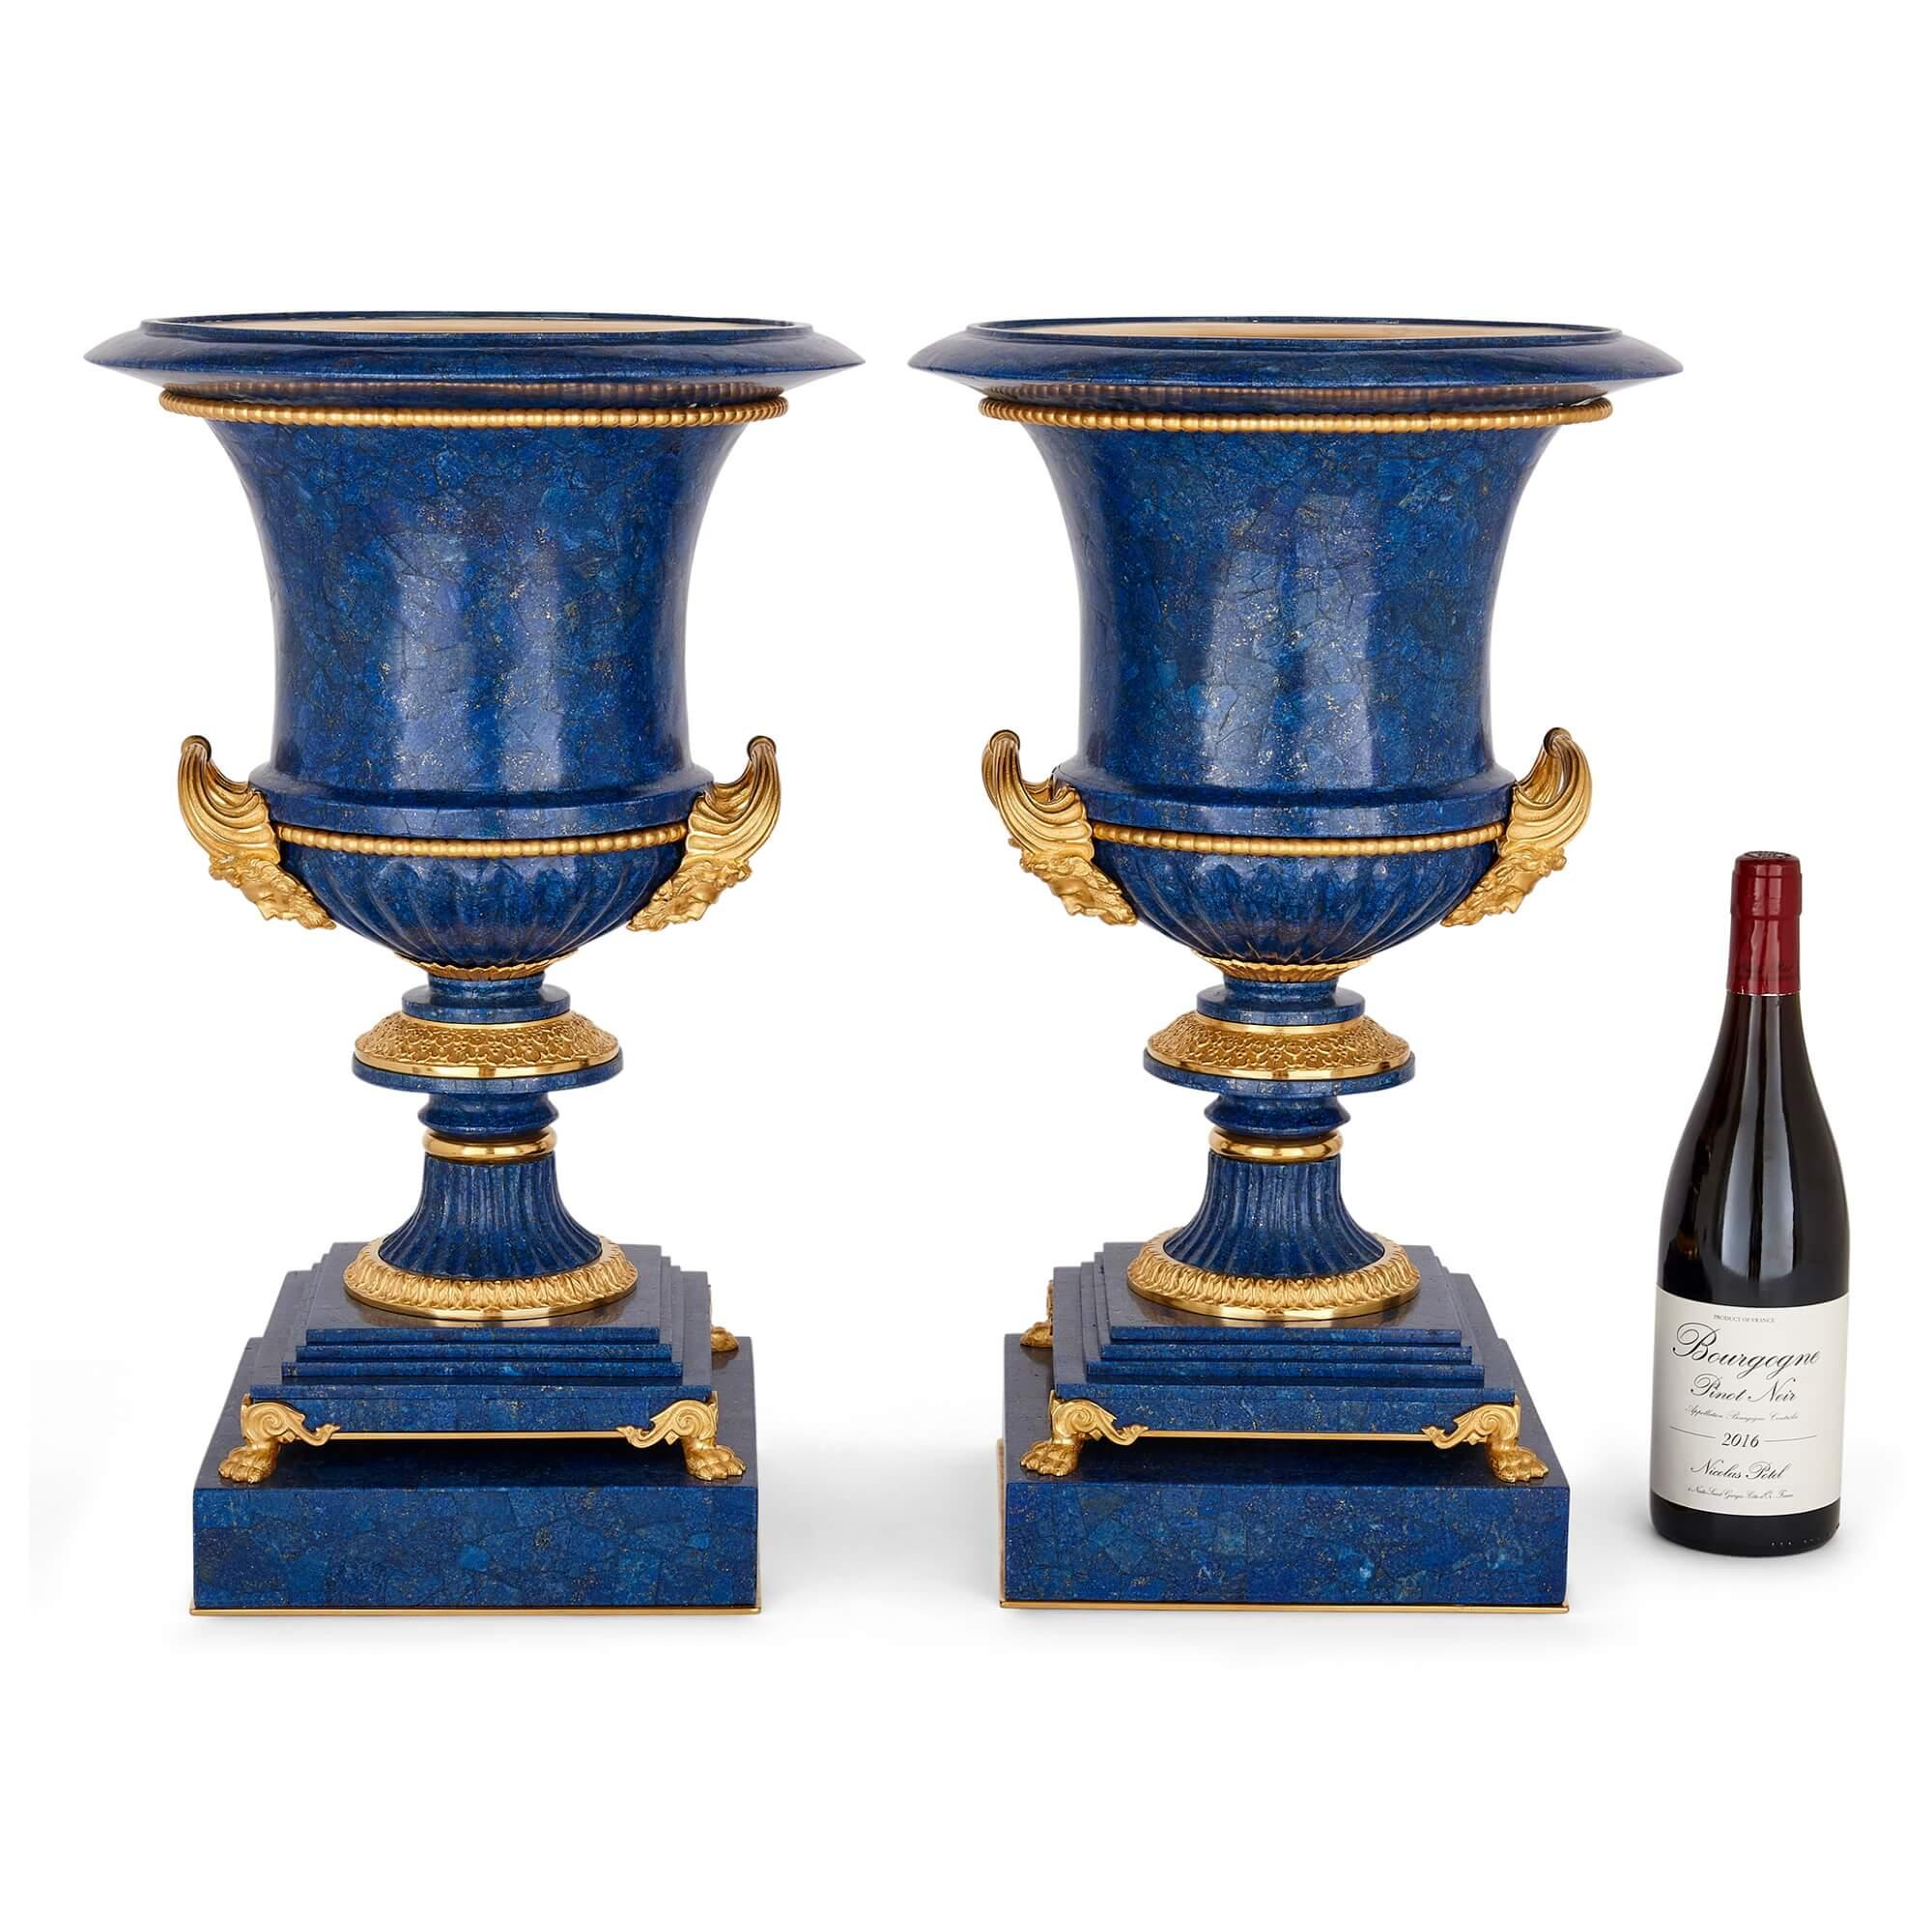 20th Century Pair of Lapis Lazuli and Ormolu Mounted 'Medici' Vases After Galberg For Sale